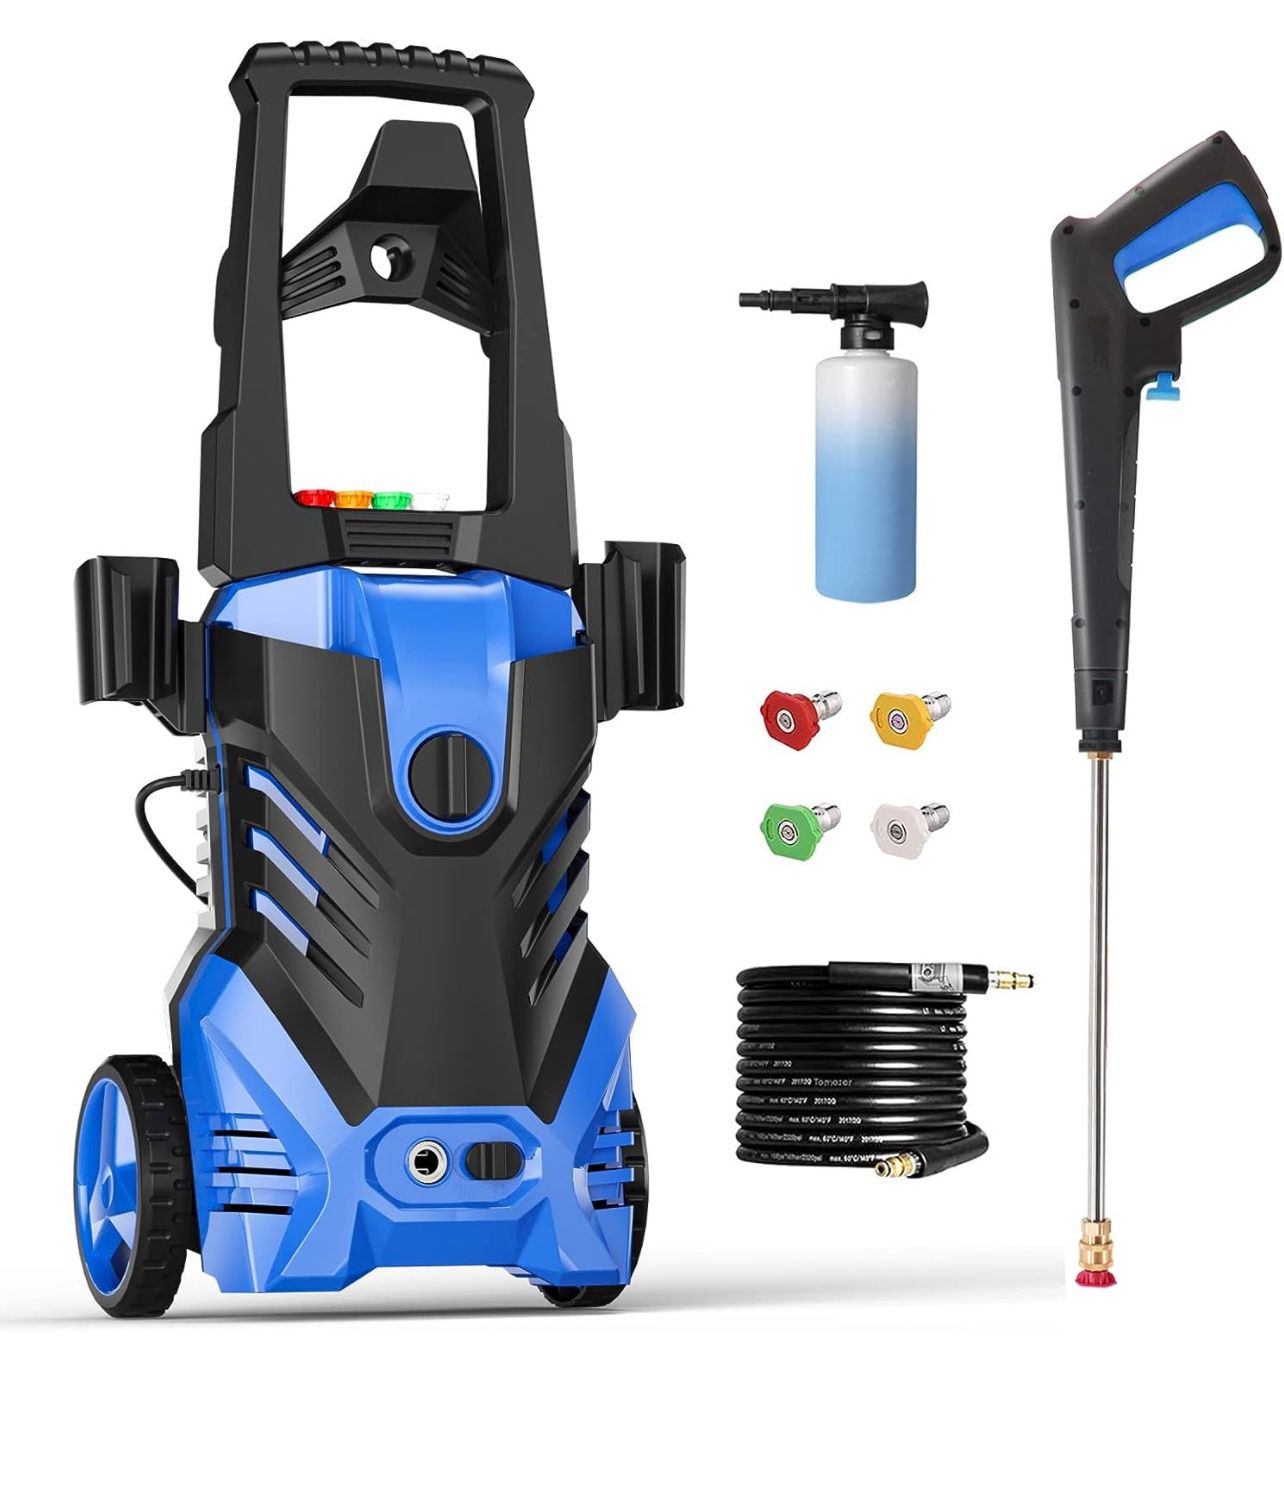 Electric Power Washer 1800PSI Max 1.1 GPM Pressure Washer with 25 Foot Hose, 16.4 Foot Power Cord, Soap Tank Car Wash Machine Blue Ideal Cleaning for 